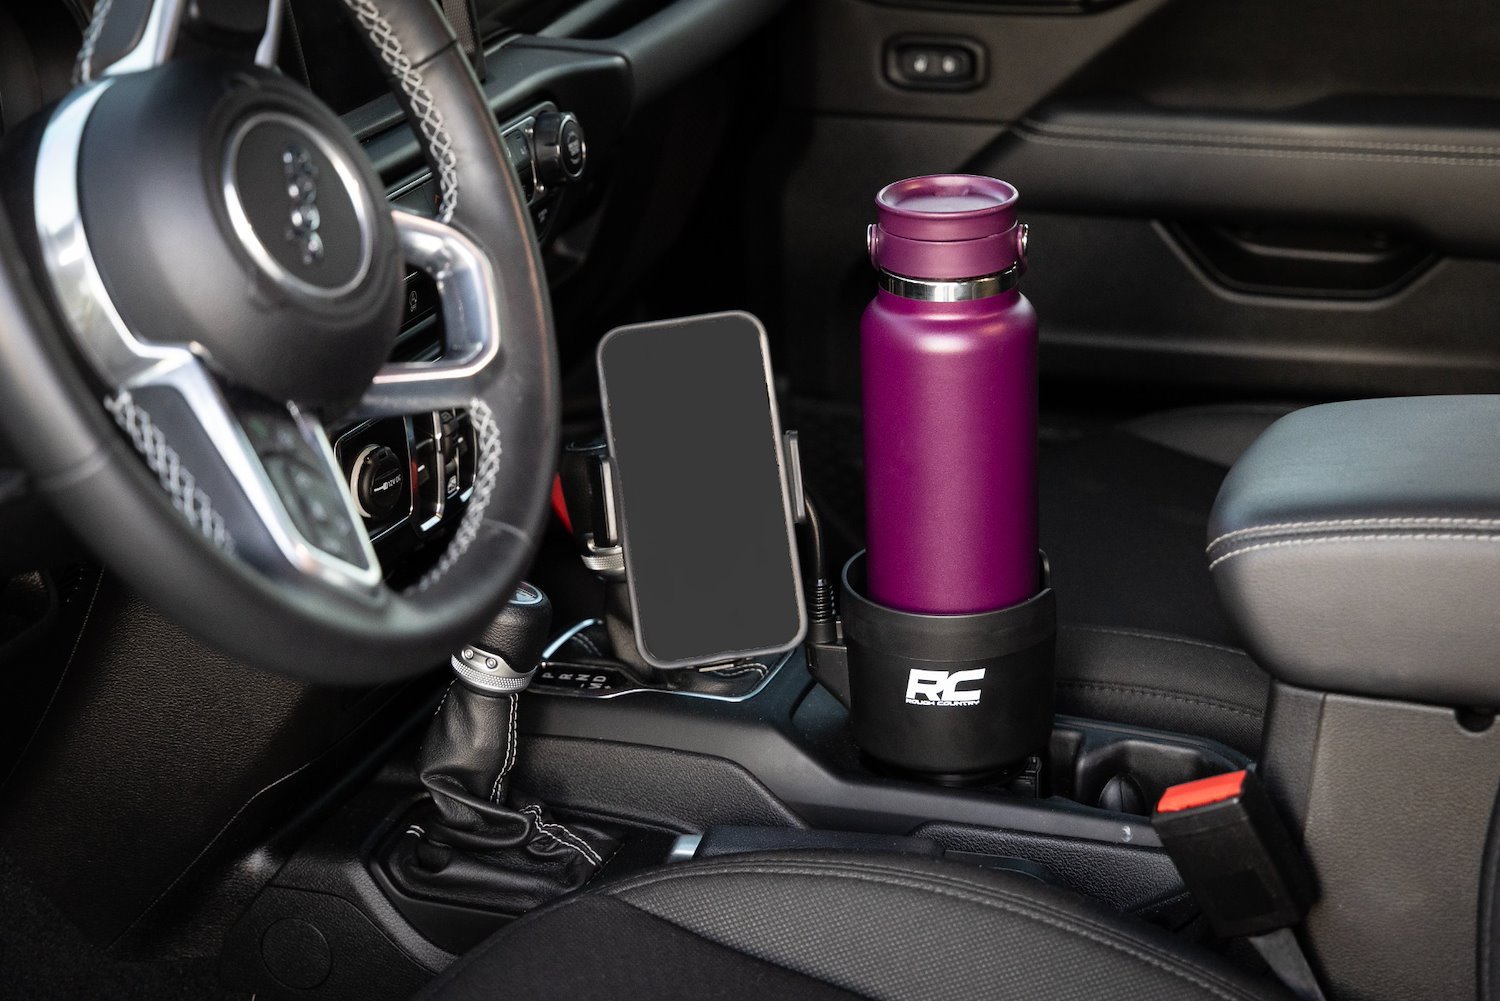 J5054 2 in 1 Expanding Cup and Phone Holder